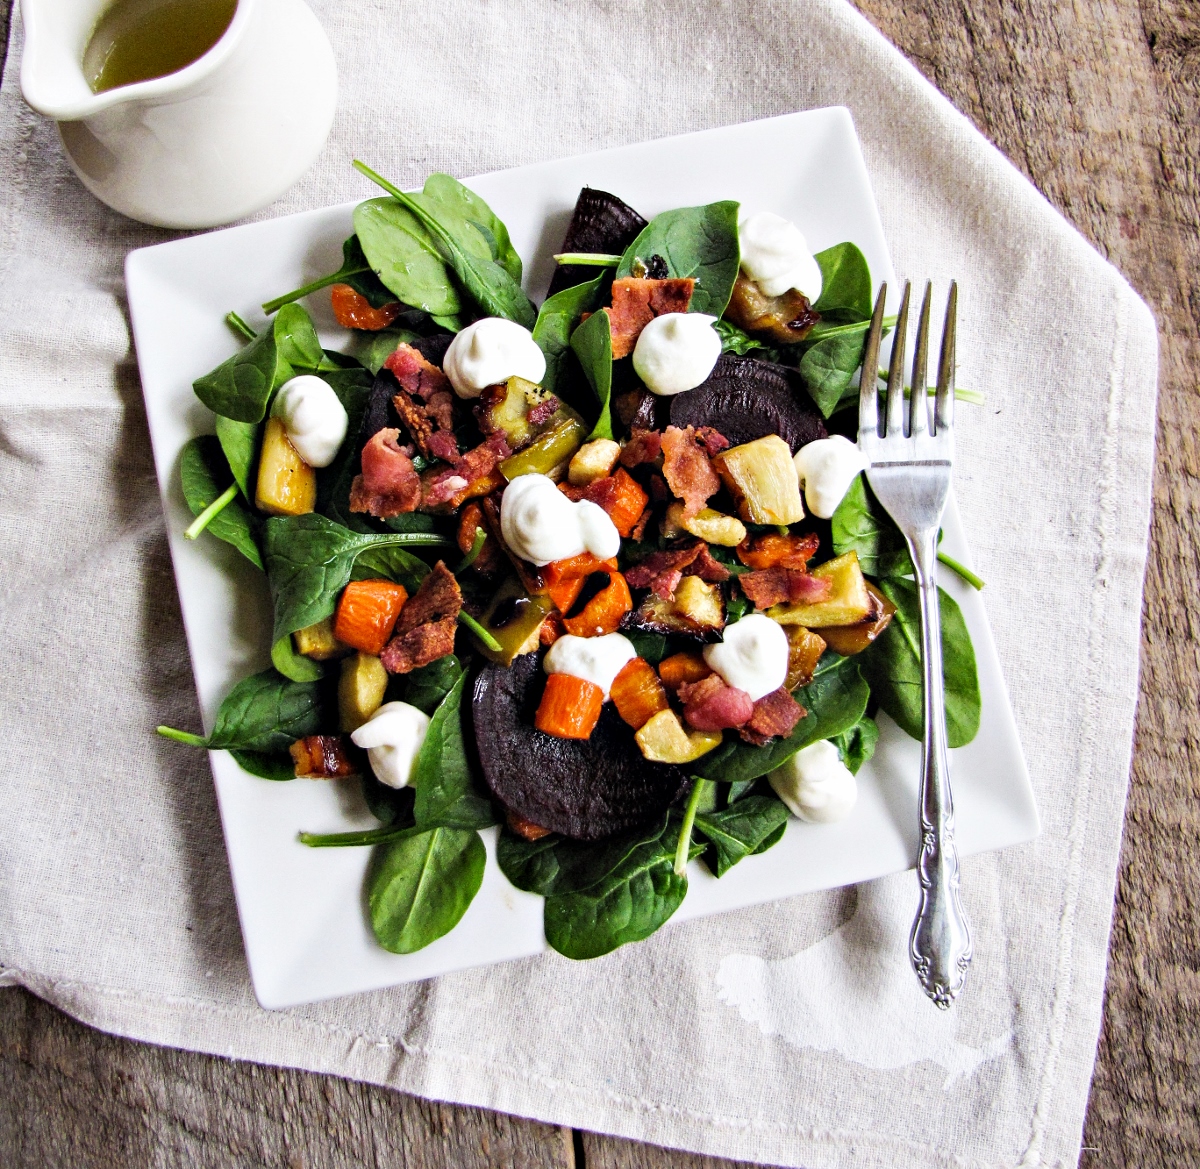 Roast Apple, Carrot, and Parsnip Salad with Goat Cheese Mousse {Katie at the Kitchen Door}